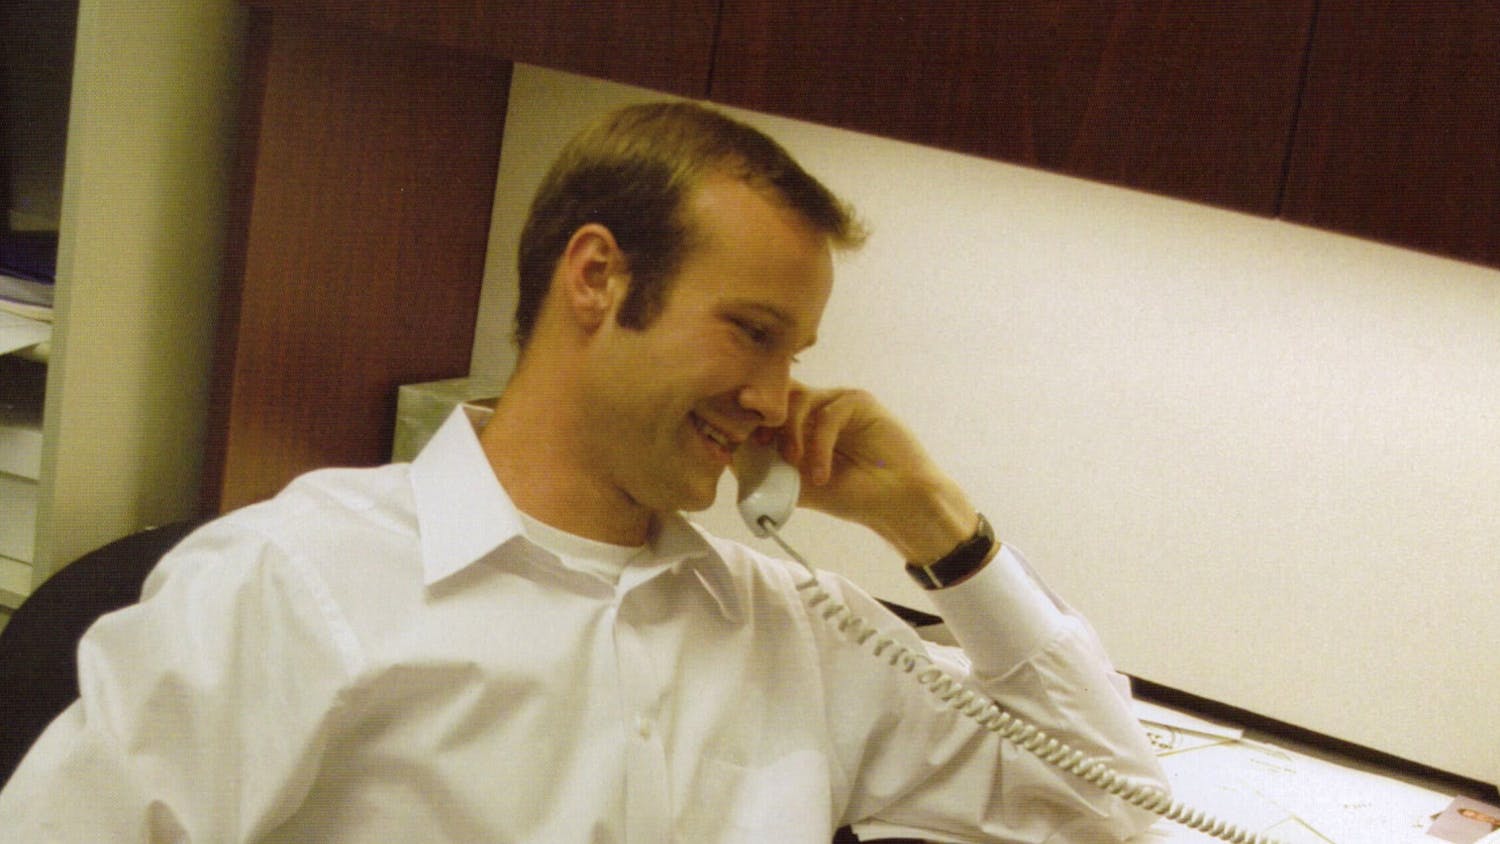 Zachery Scott sits at his desk answering a phone call during his time in student government. Scott, the first openly LGBTQIA+ student body president, was elected in 2004.